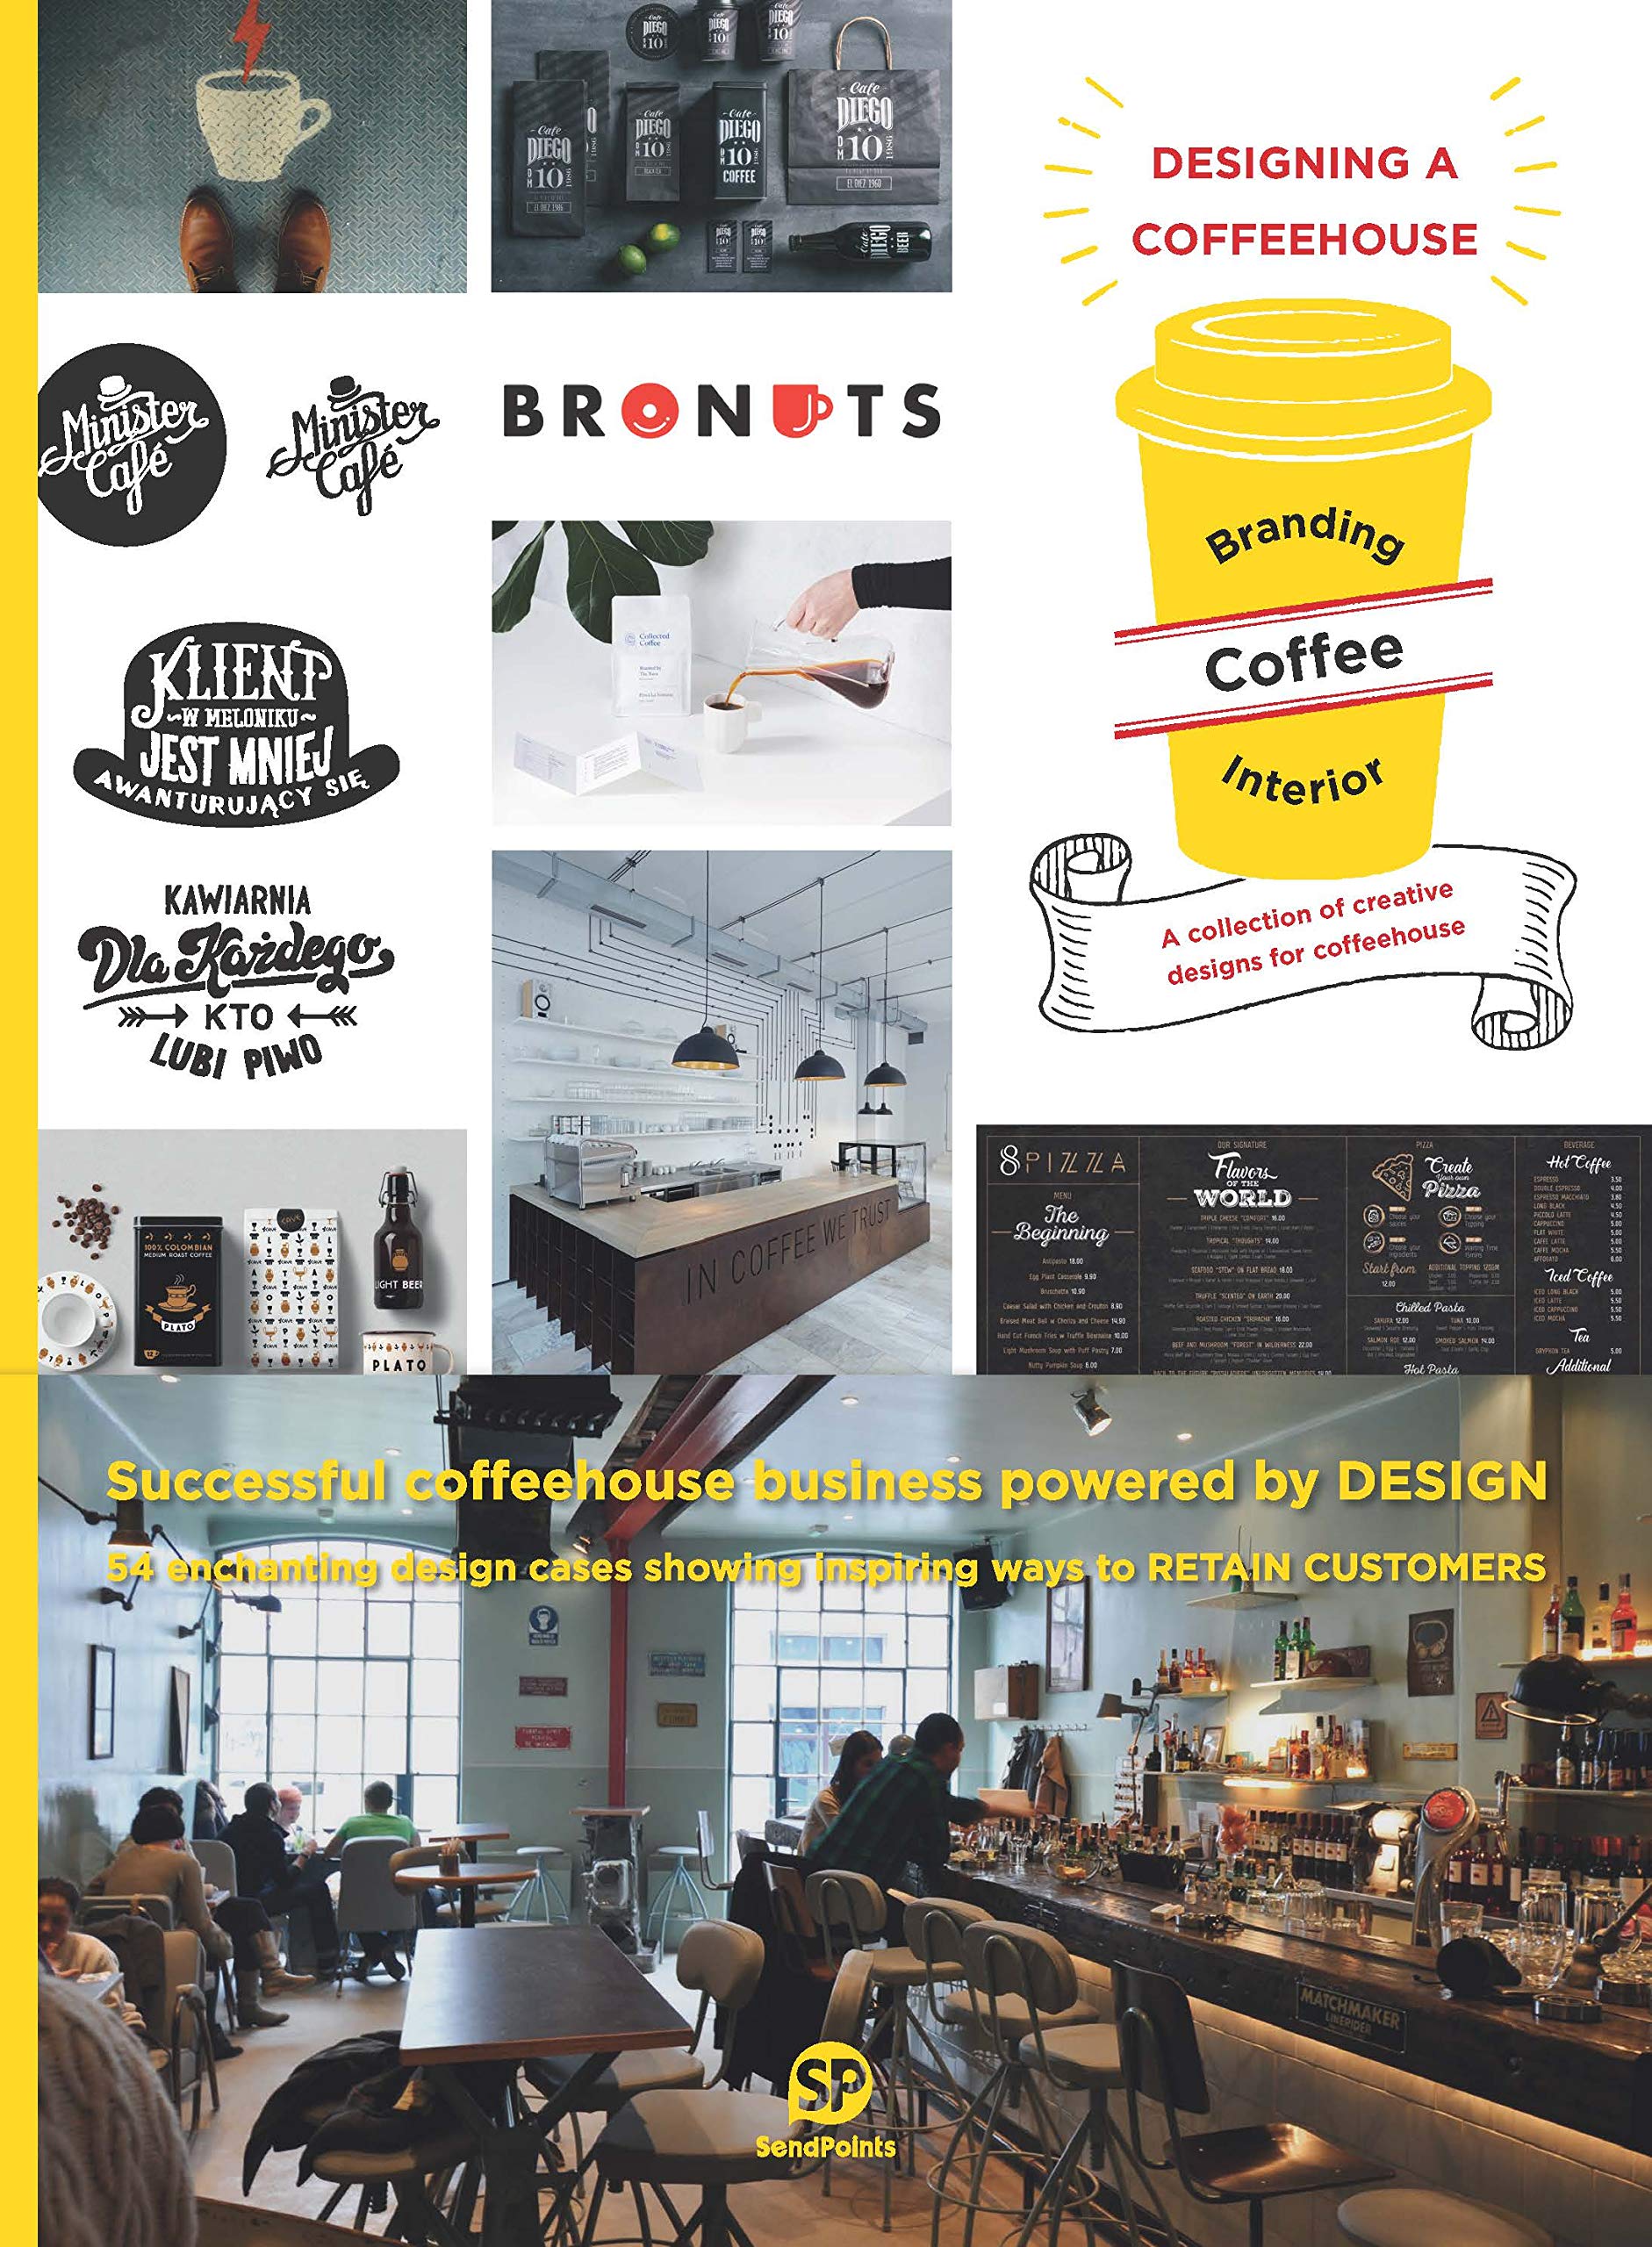 Designing a Coffeehouse | SendPoints